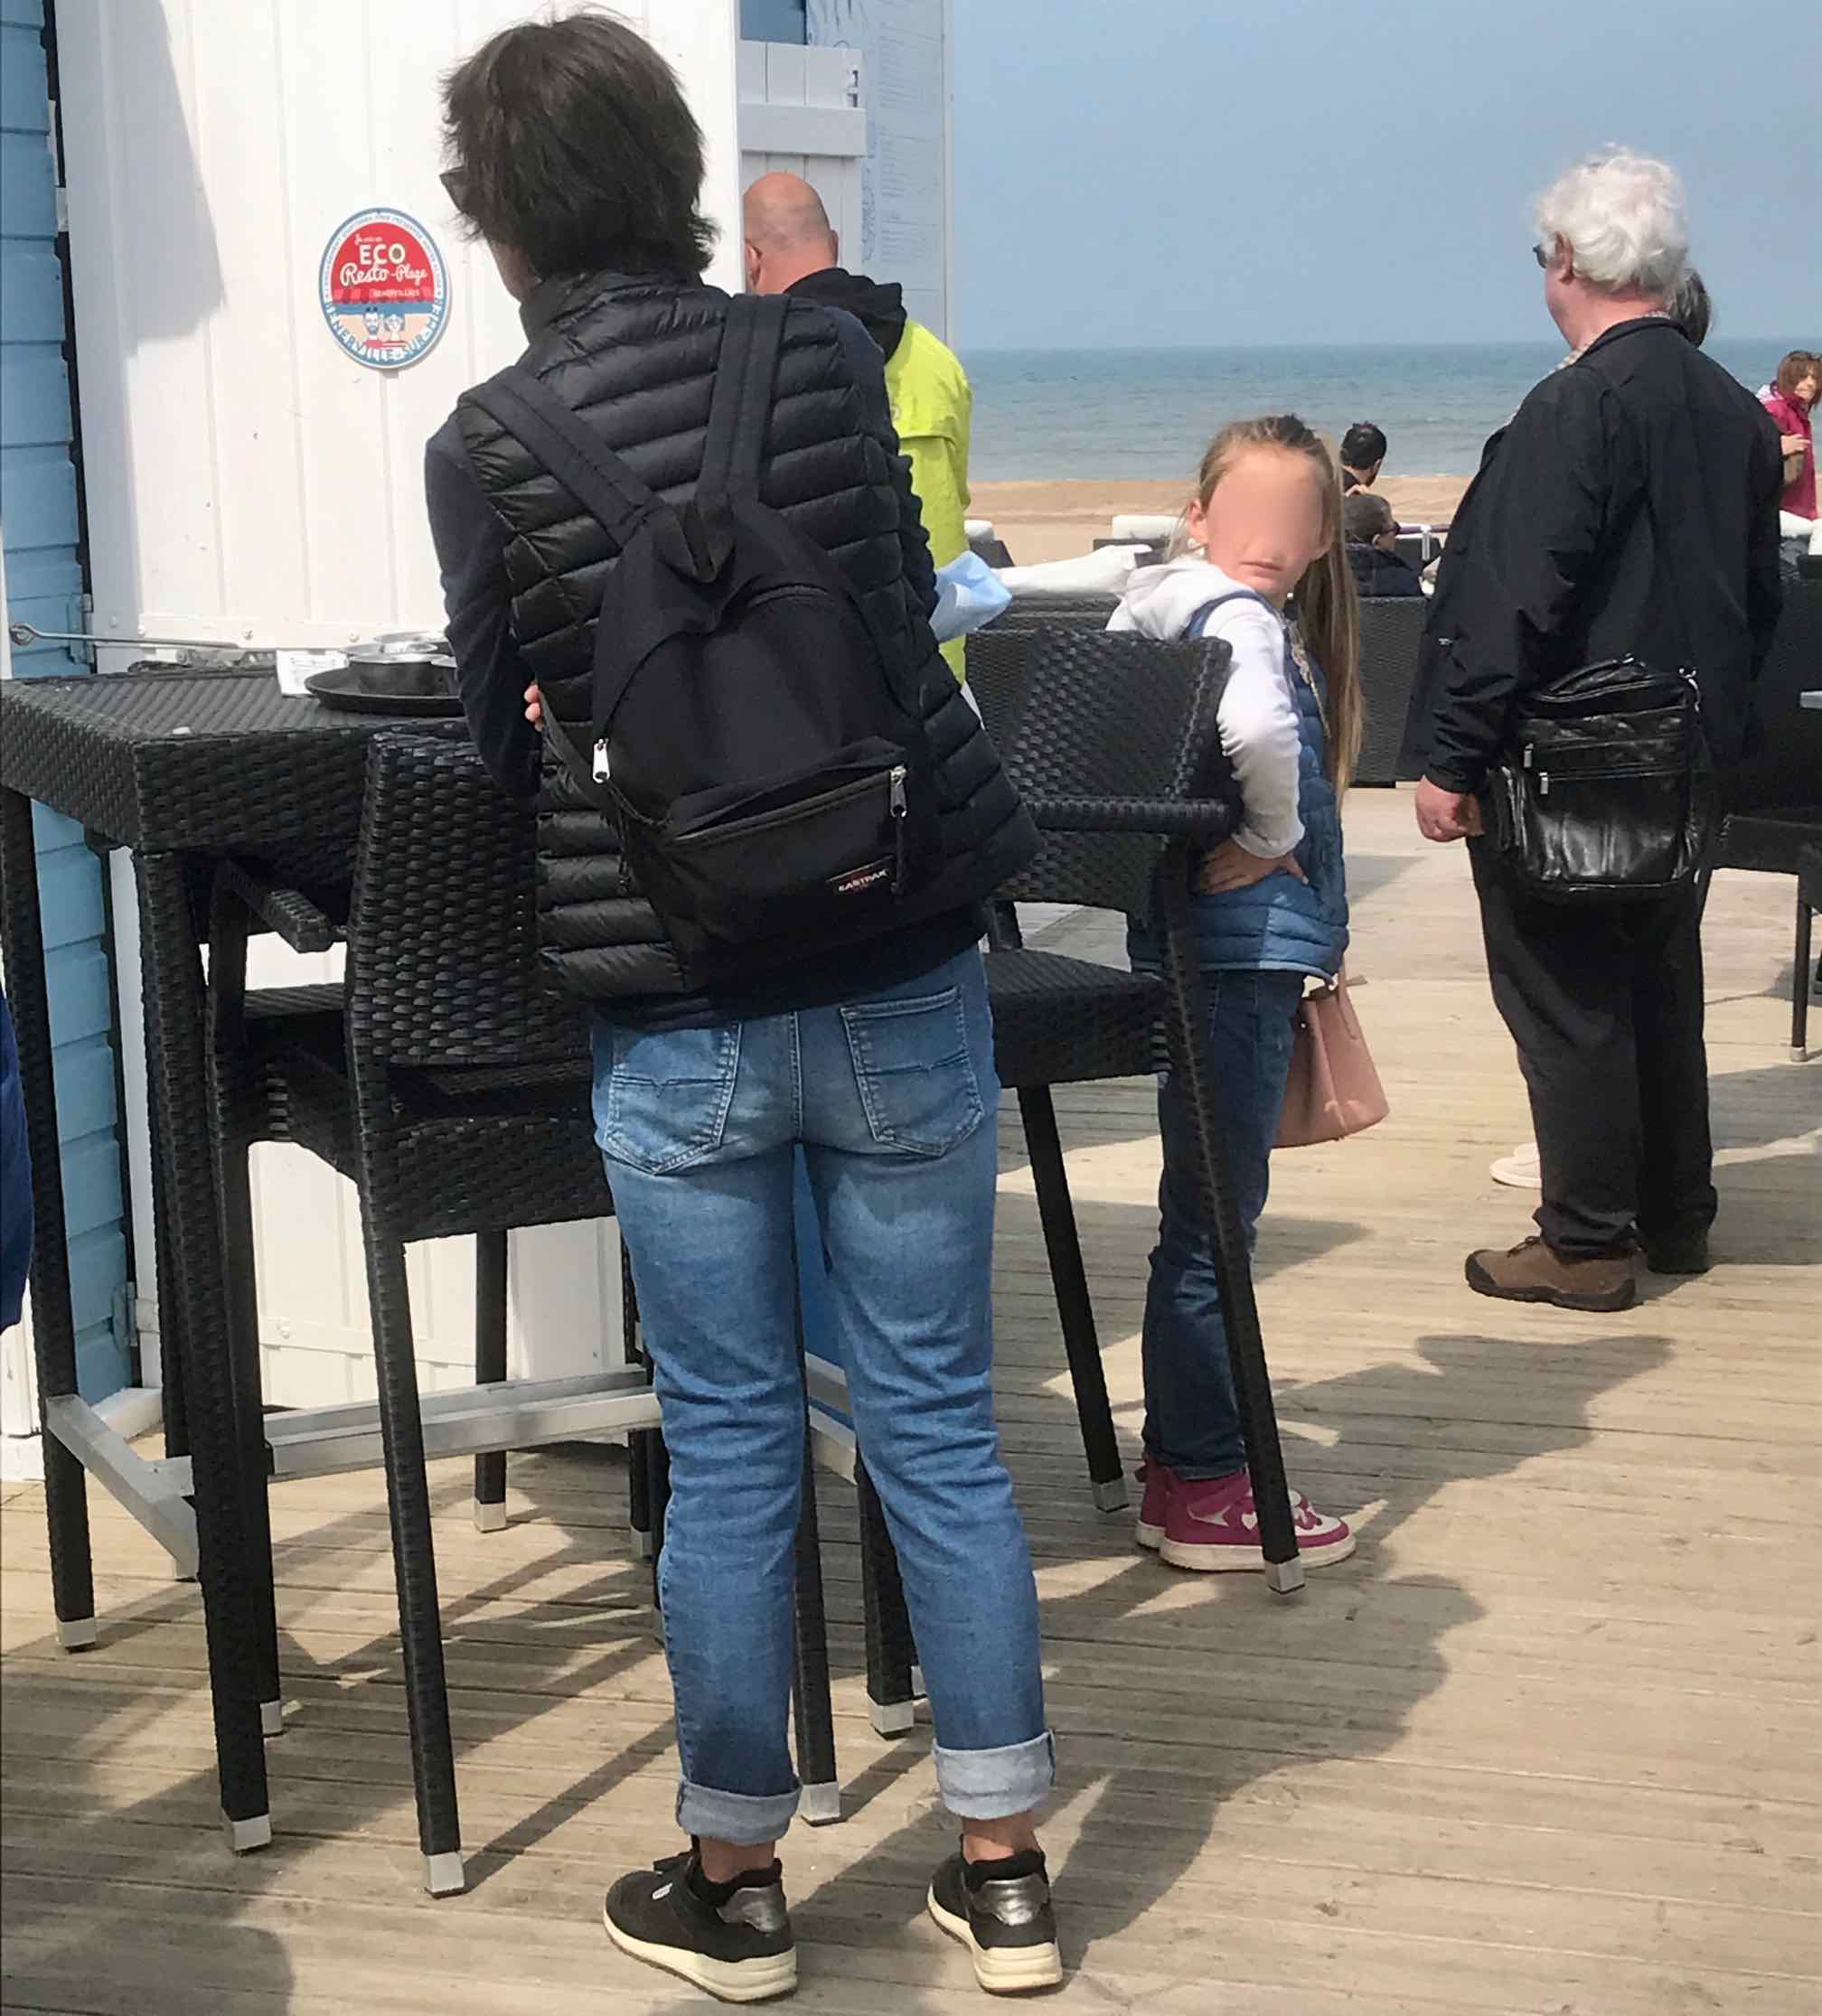 woman in line for buying ice cream at seaside resort